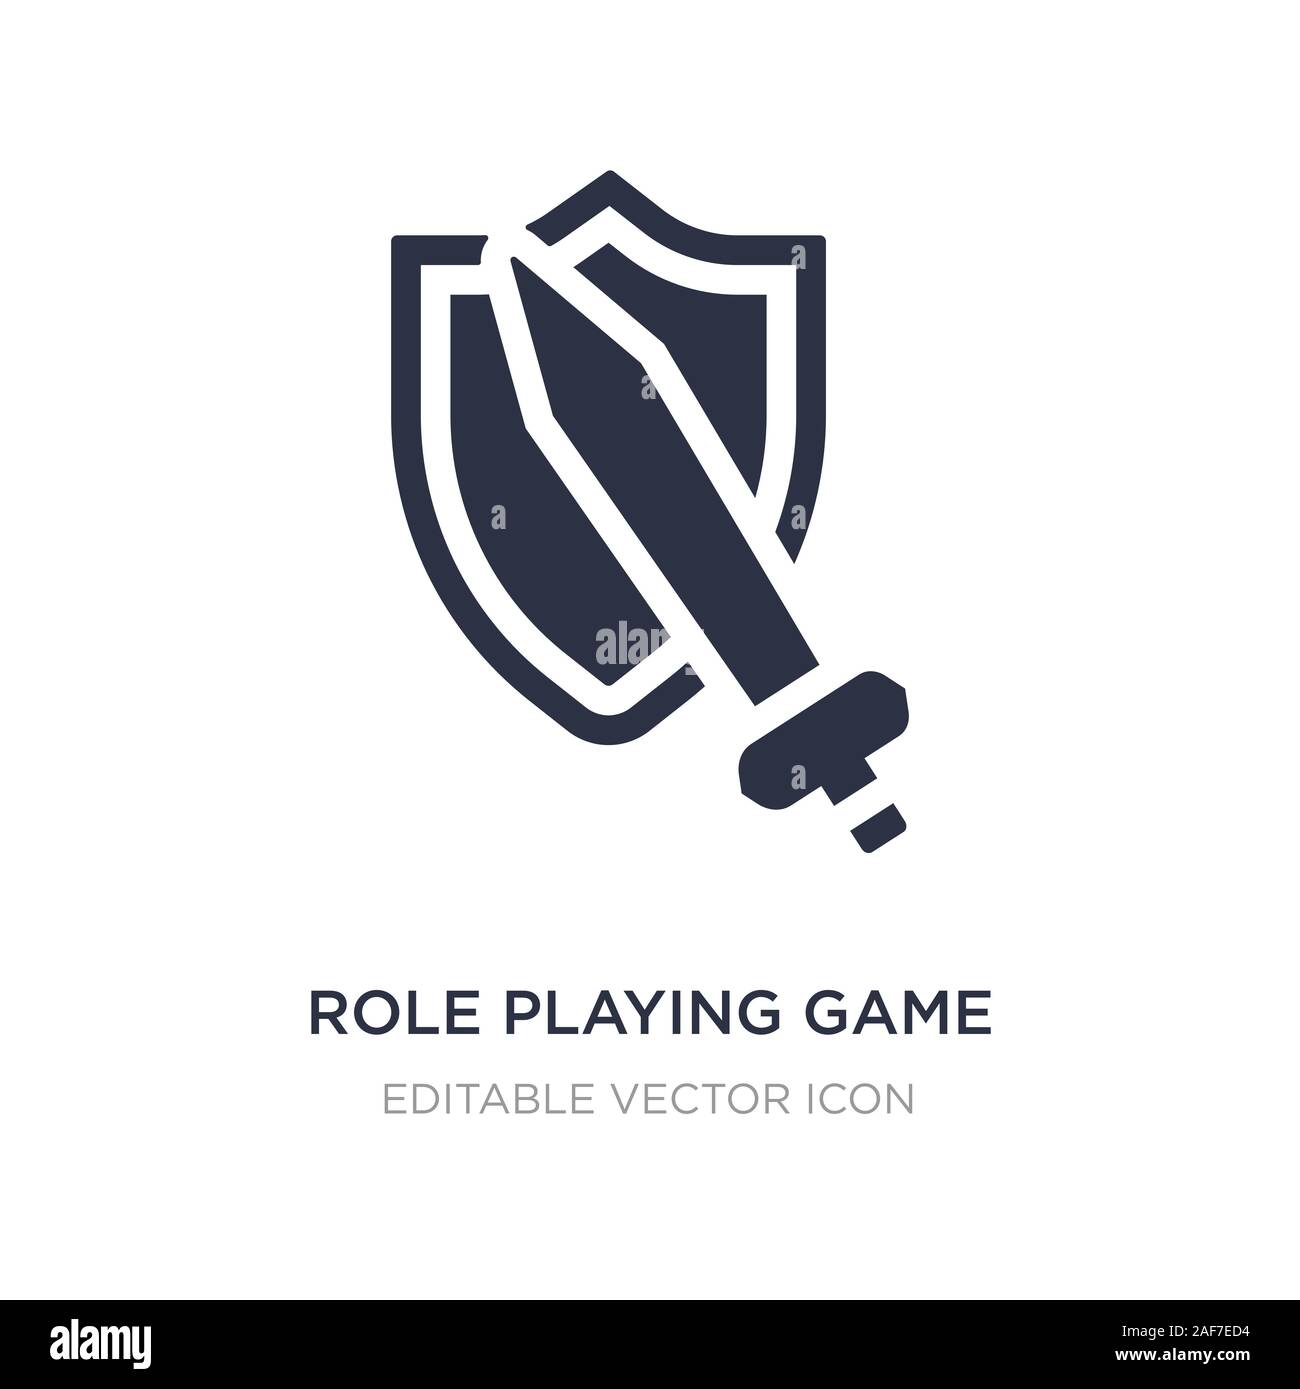 Role-playing game – g a m e . d e s i g n